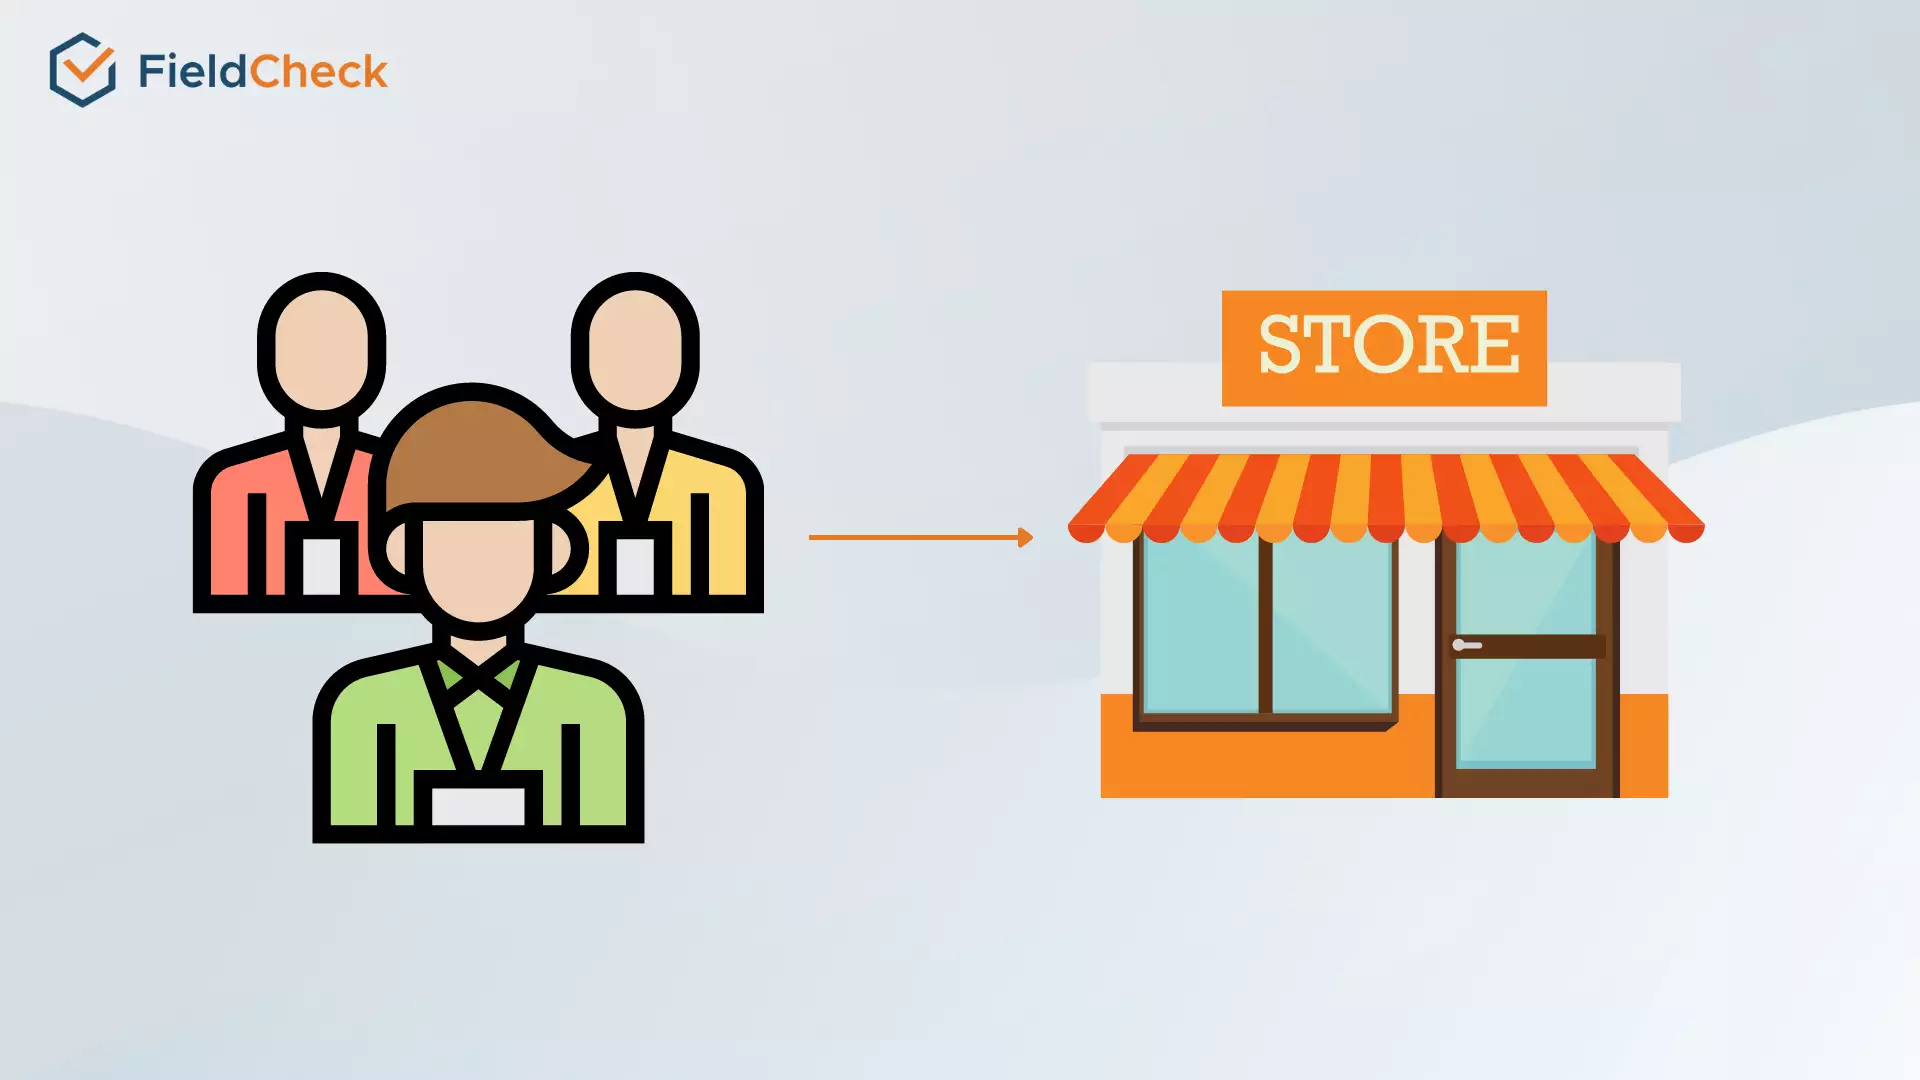 Why Should You Build A Chain Store?